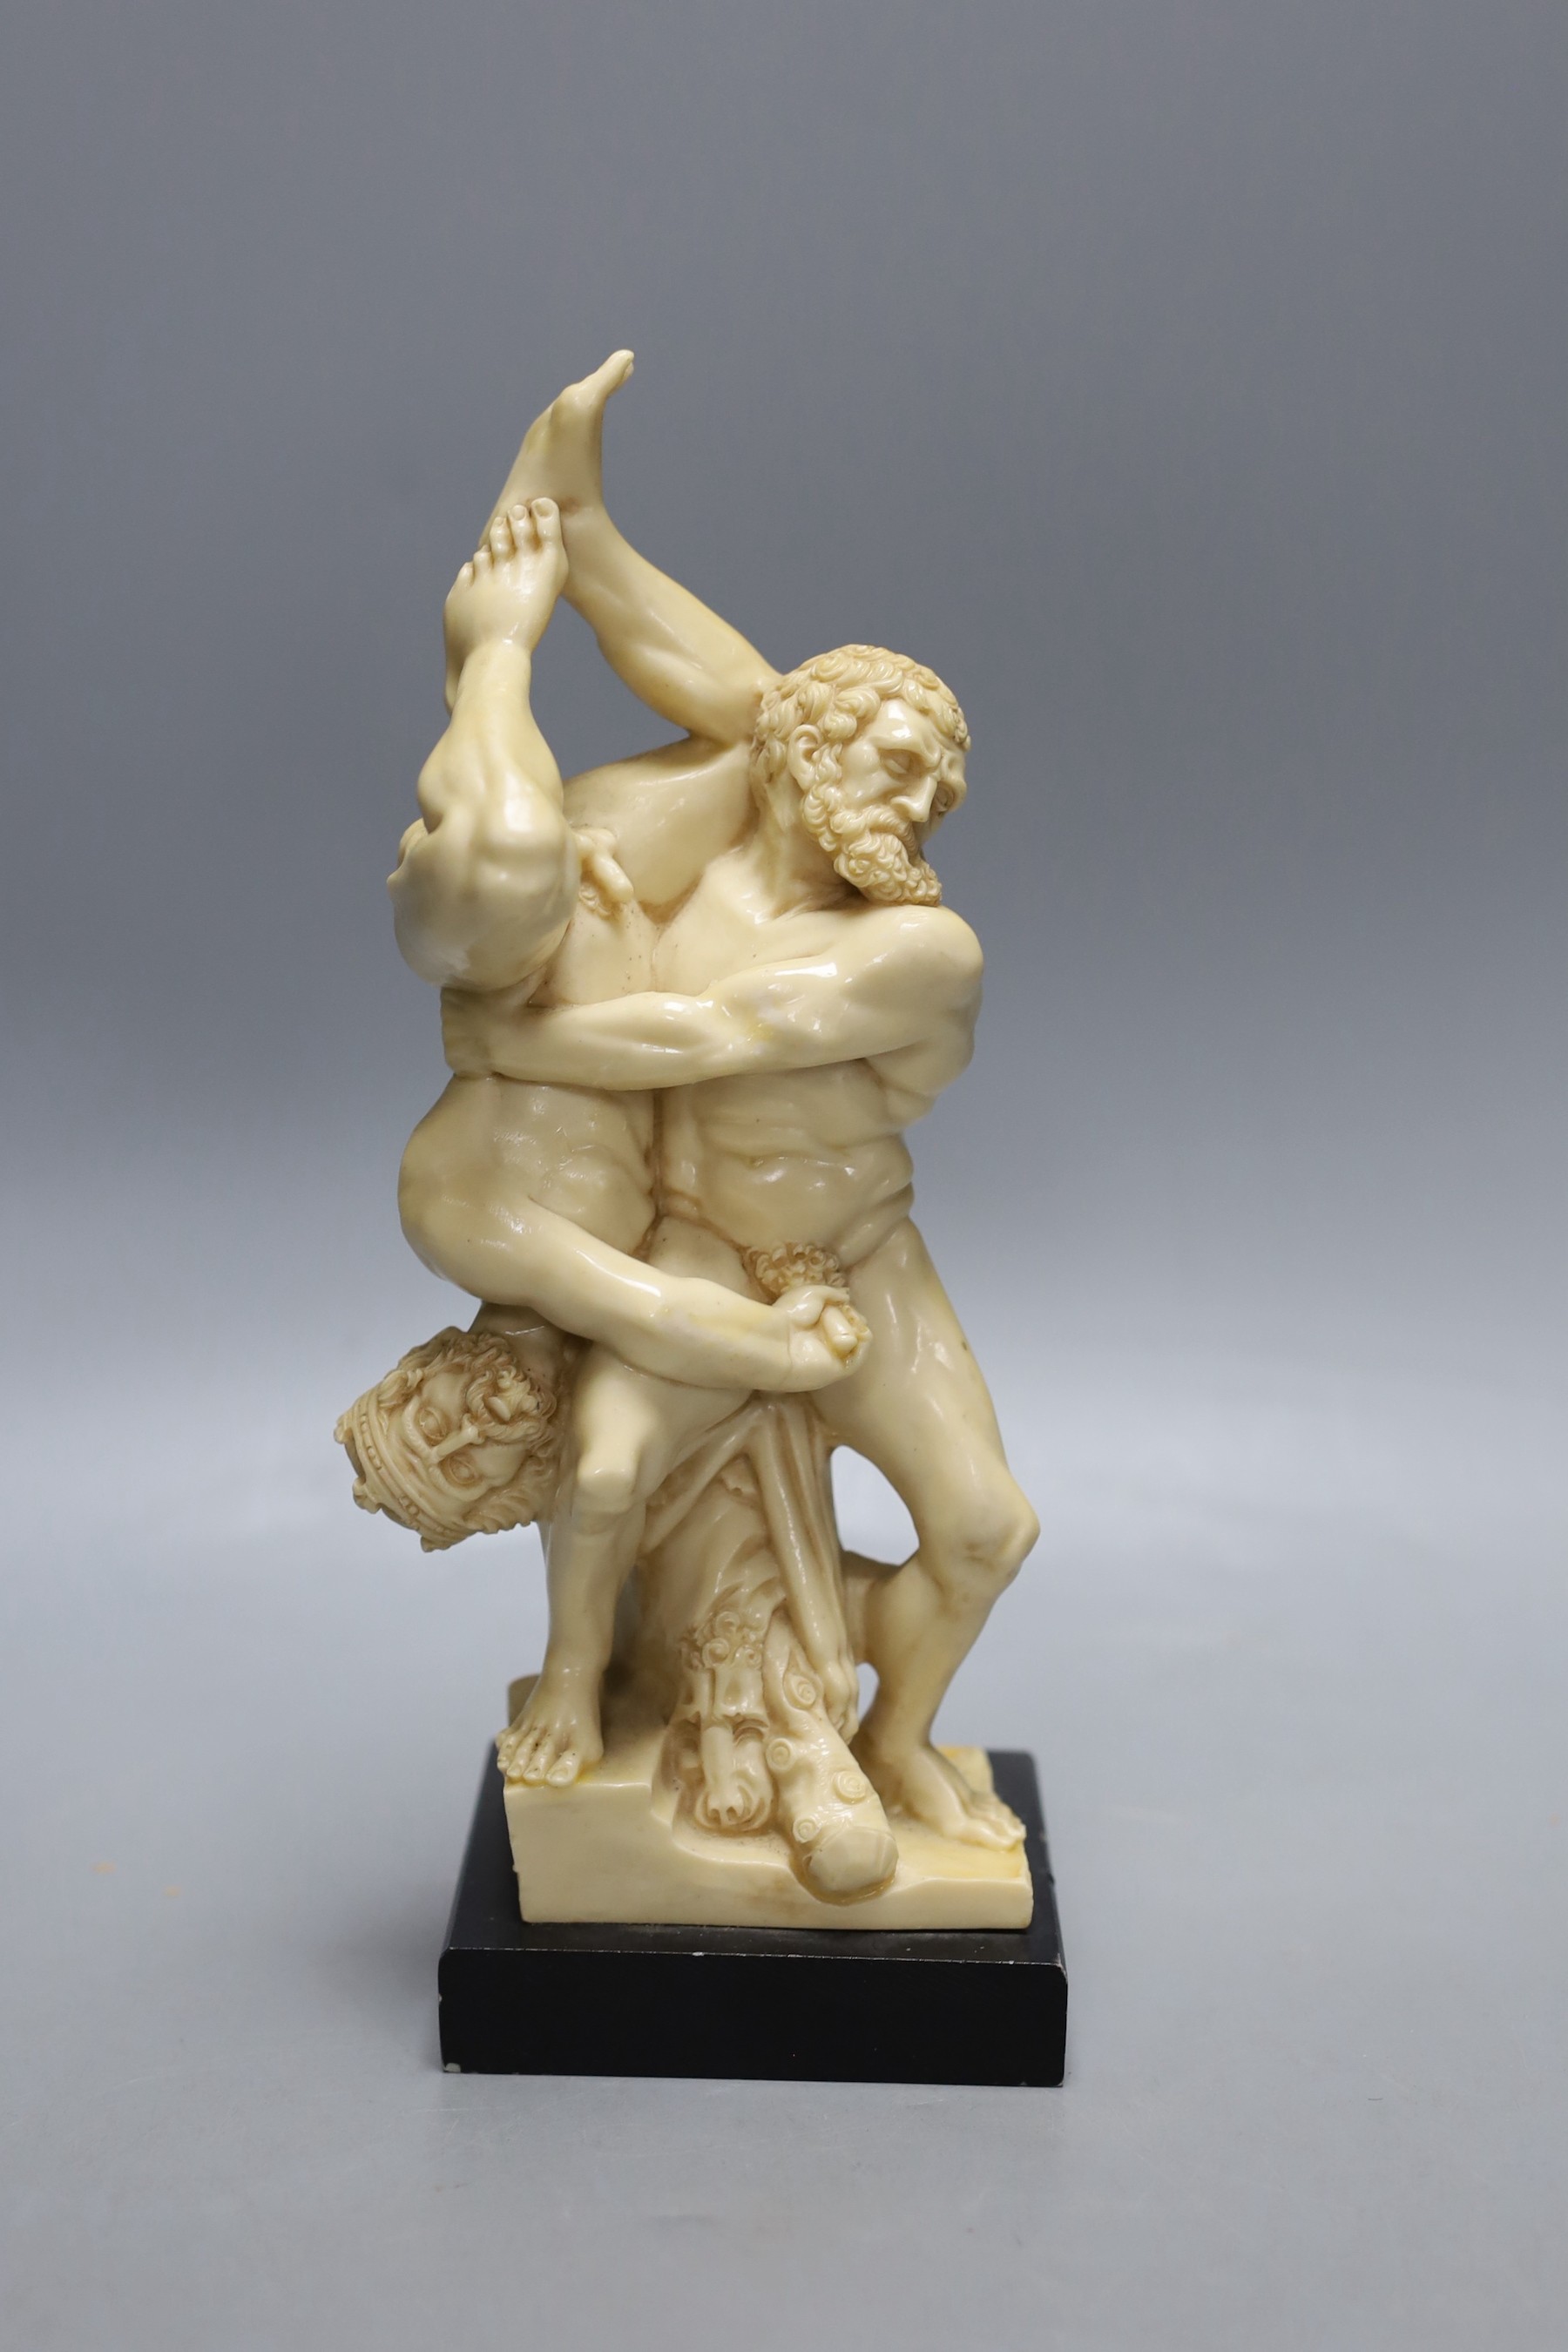 After the antique, a resin model of Hercules and Diomedes, 25cm